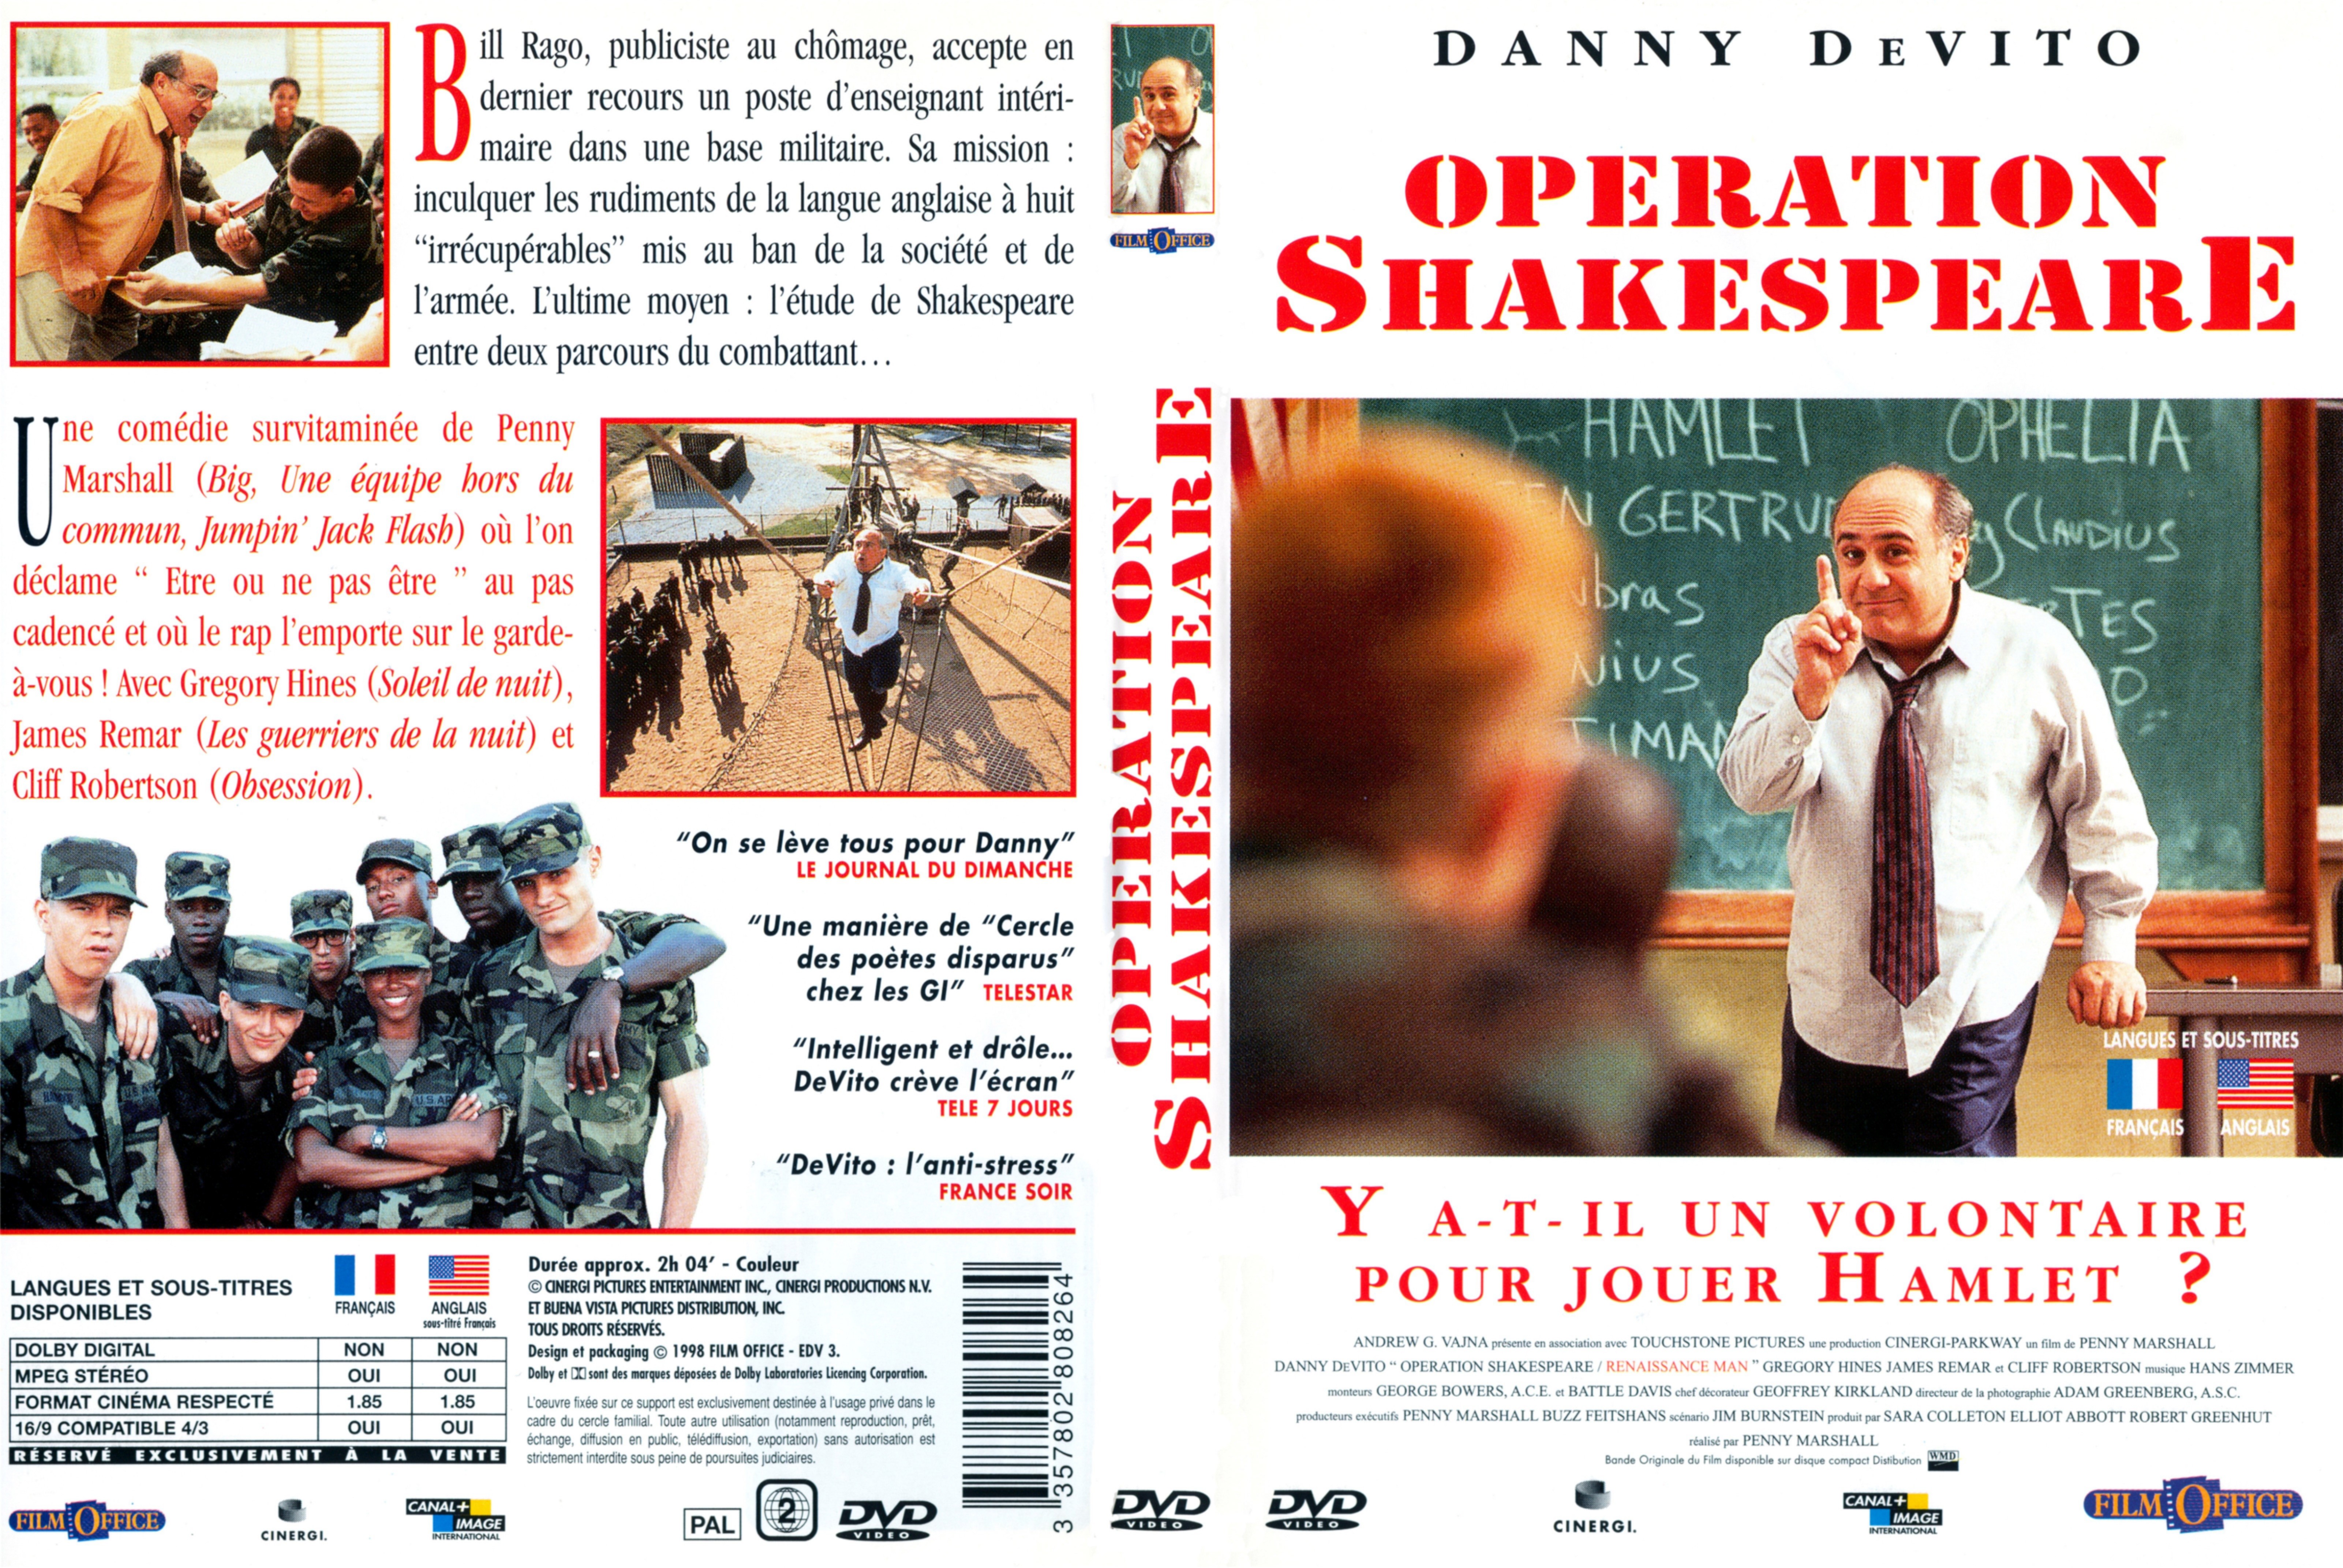 Jaquette DVD Operation Shakespeare